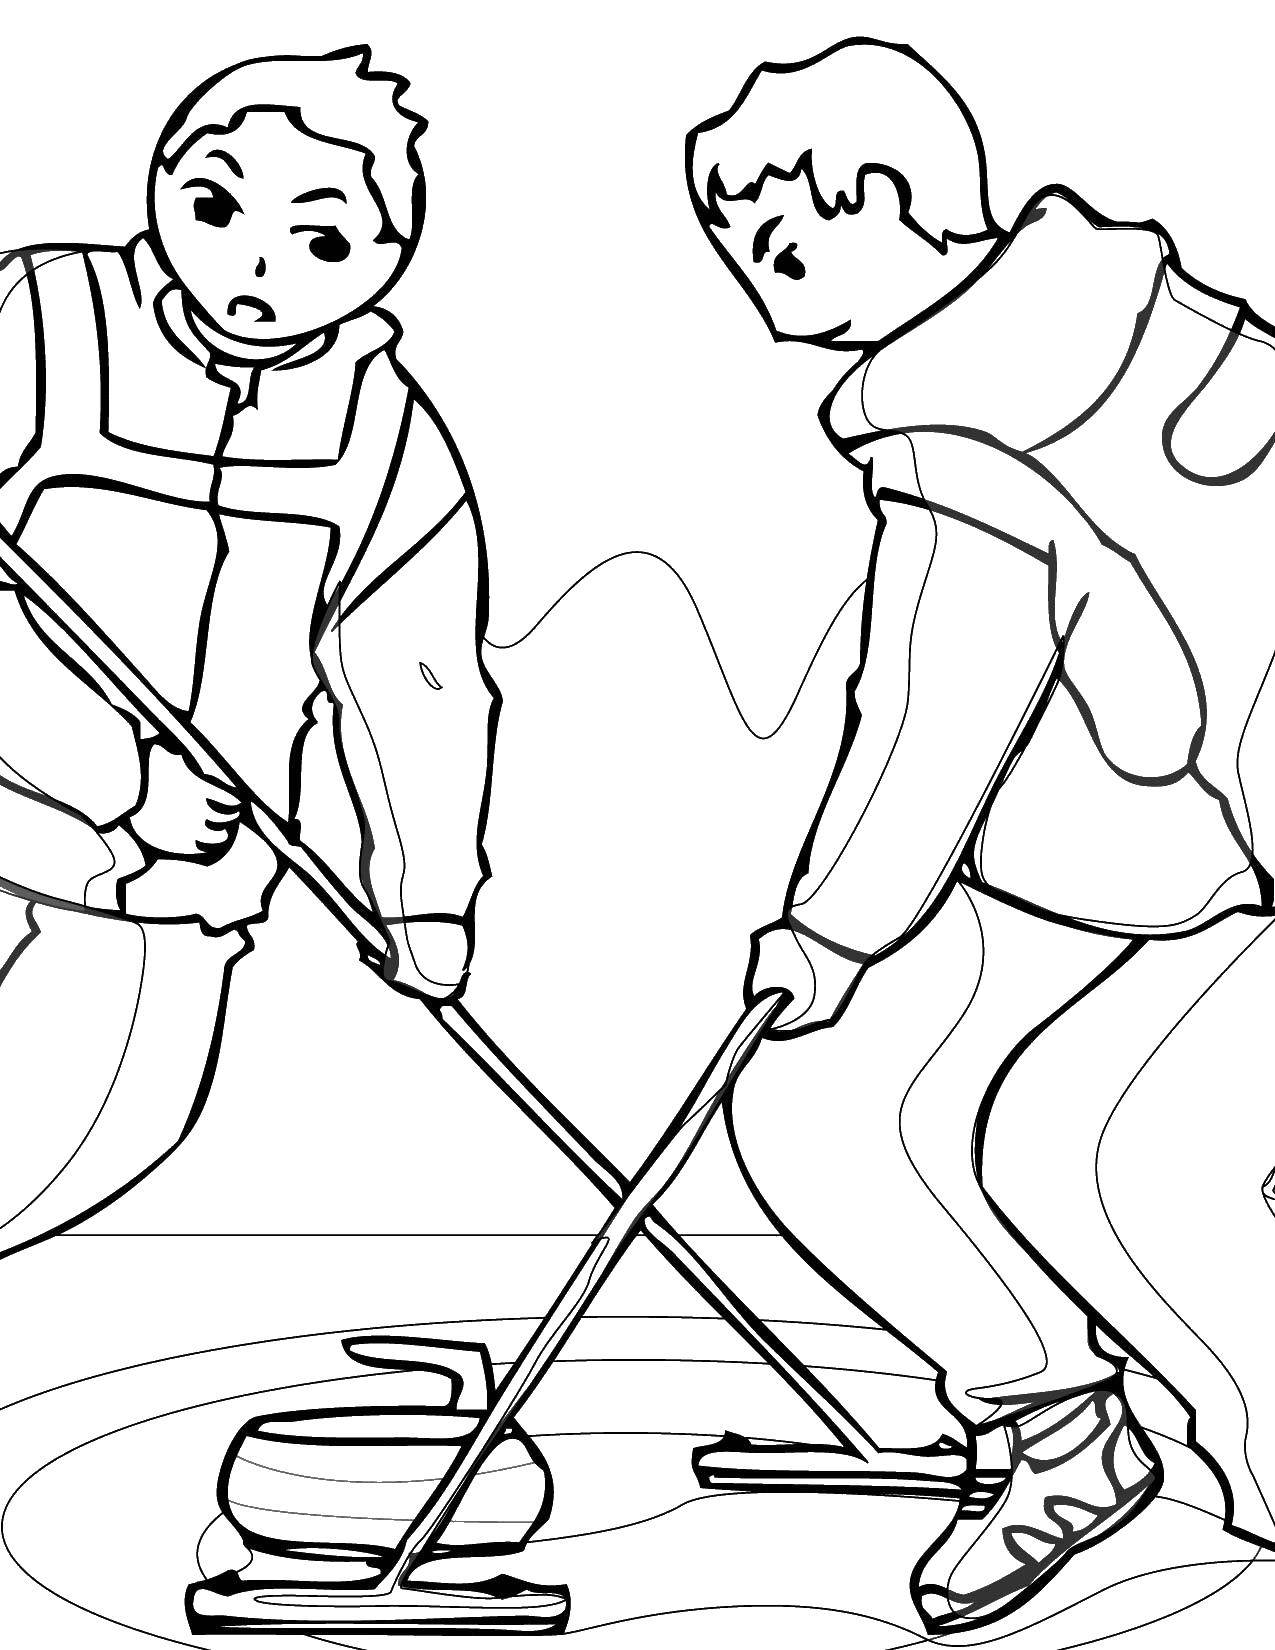 Coloring Curling. Category Sports. Tags:  sports, Curling.